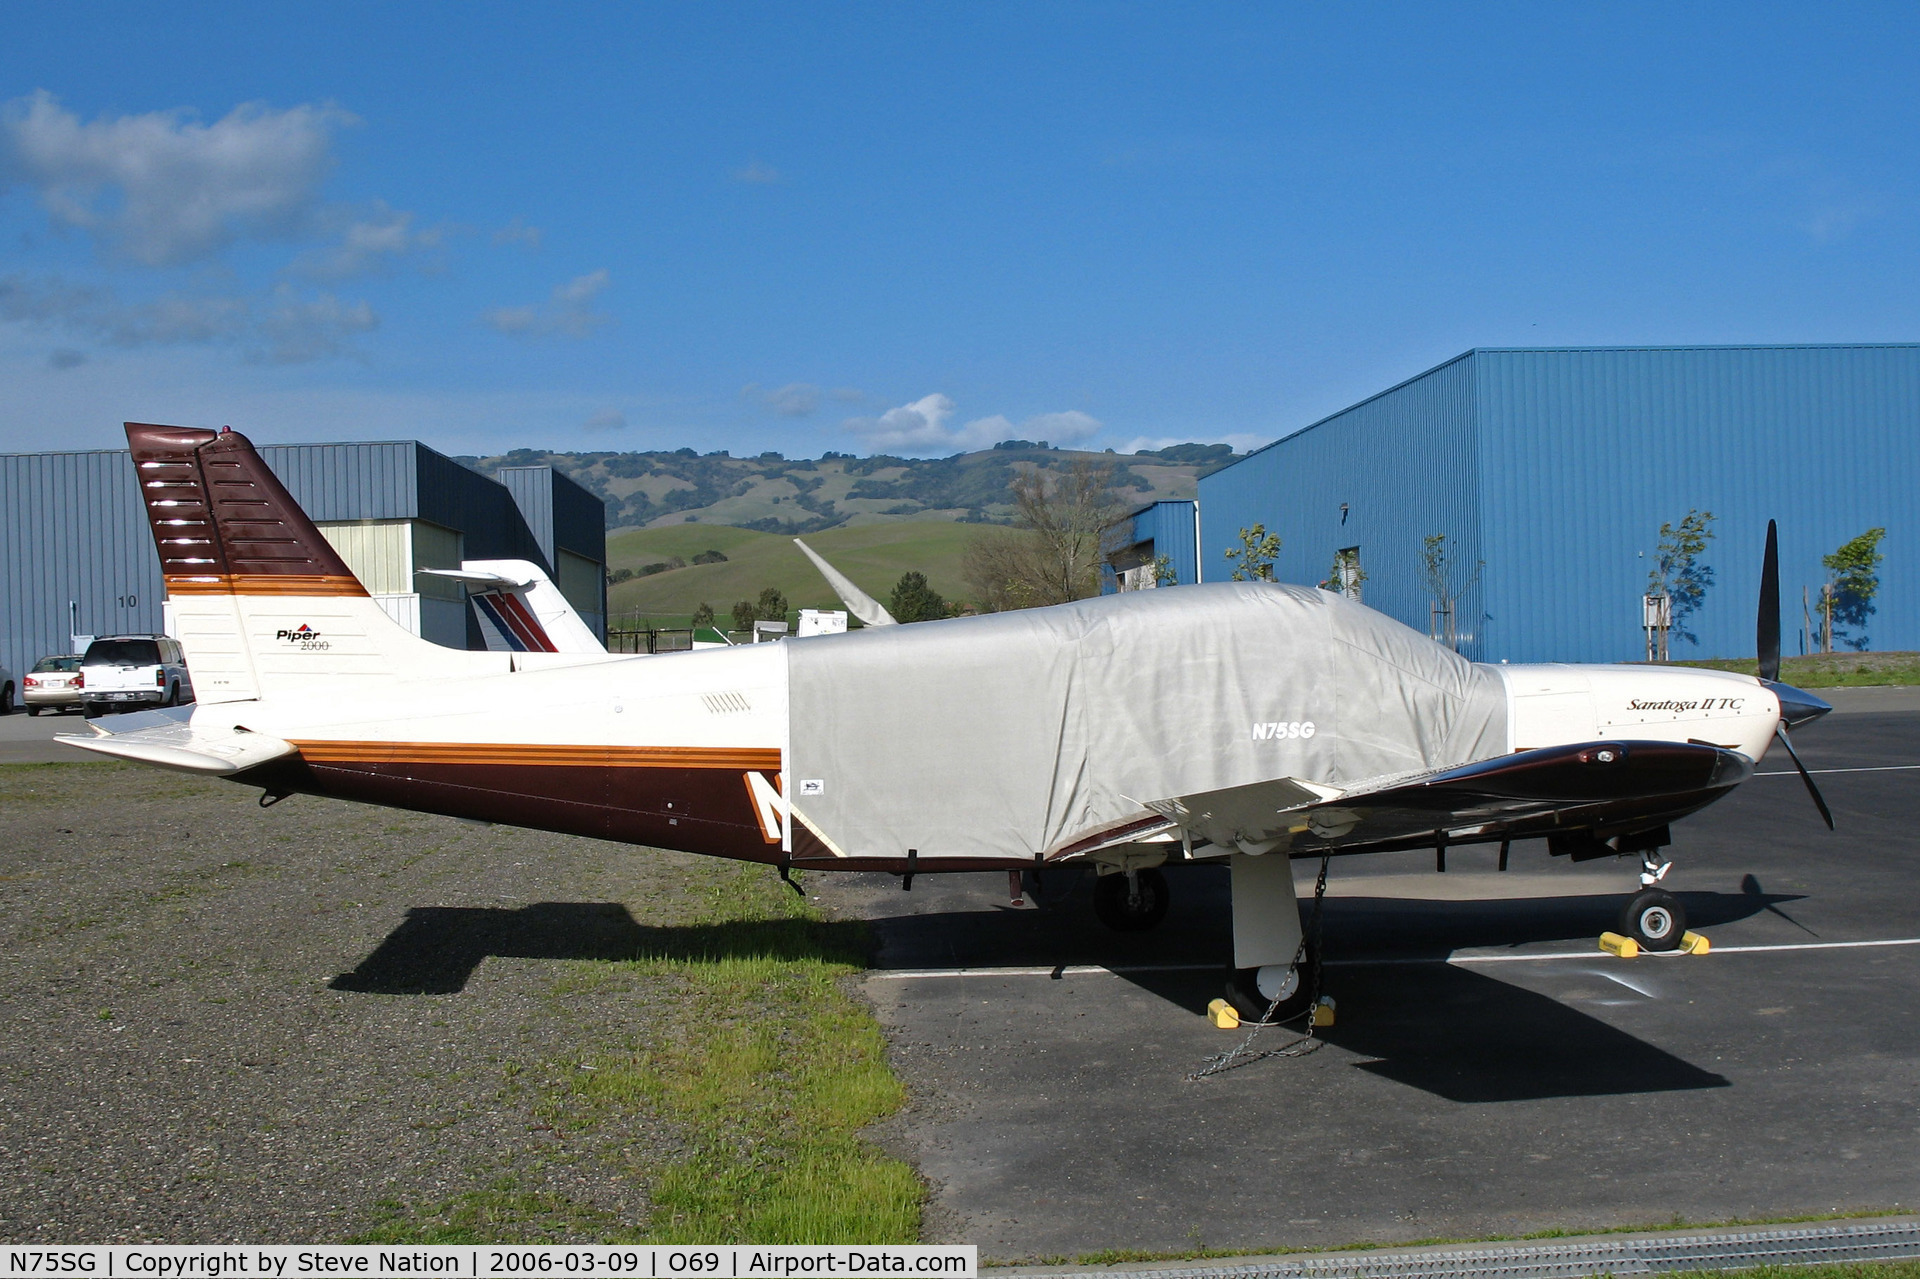 N75SG, 2000 Piper PA-32R-301T Turbo Saratoga C/N 3257175, 2000 Piper PA-32R-301T in for maintenance @ Petaluma, CA (registered to new owner in Florida by Nov 2007)